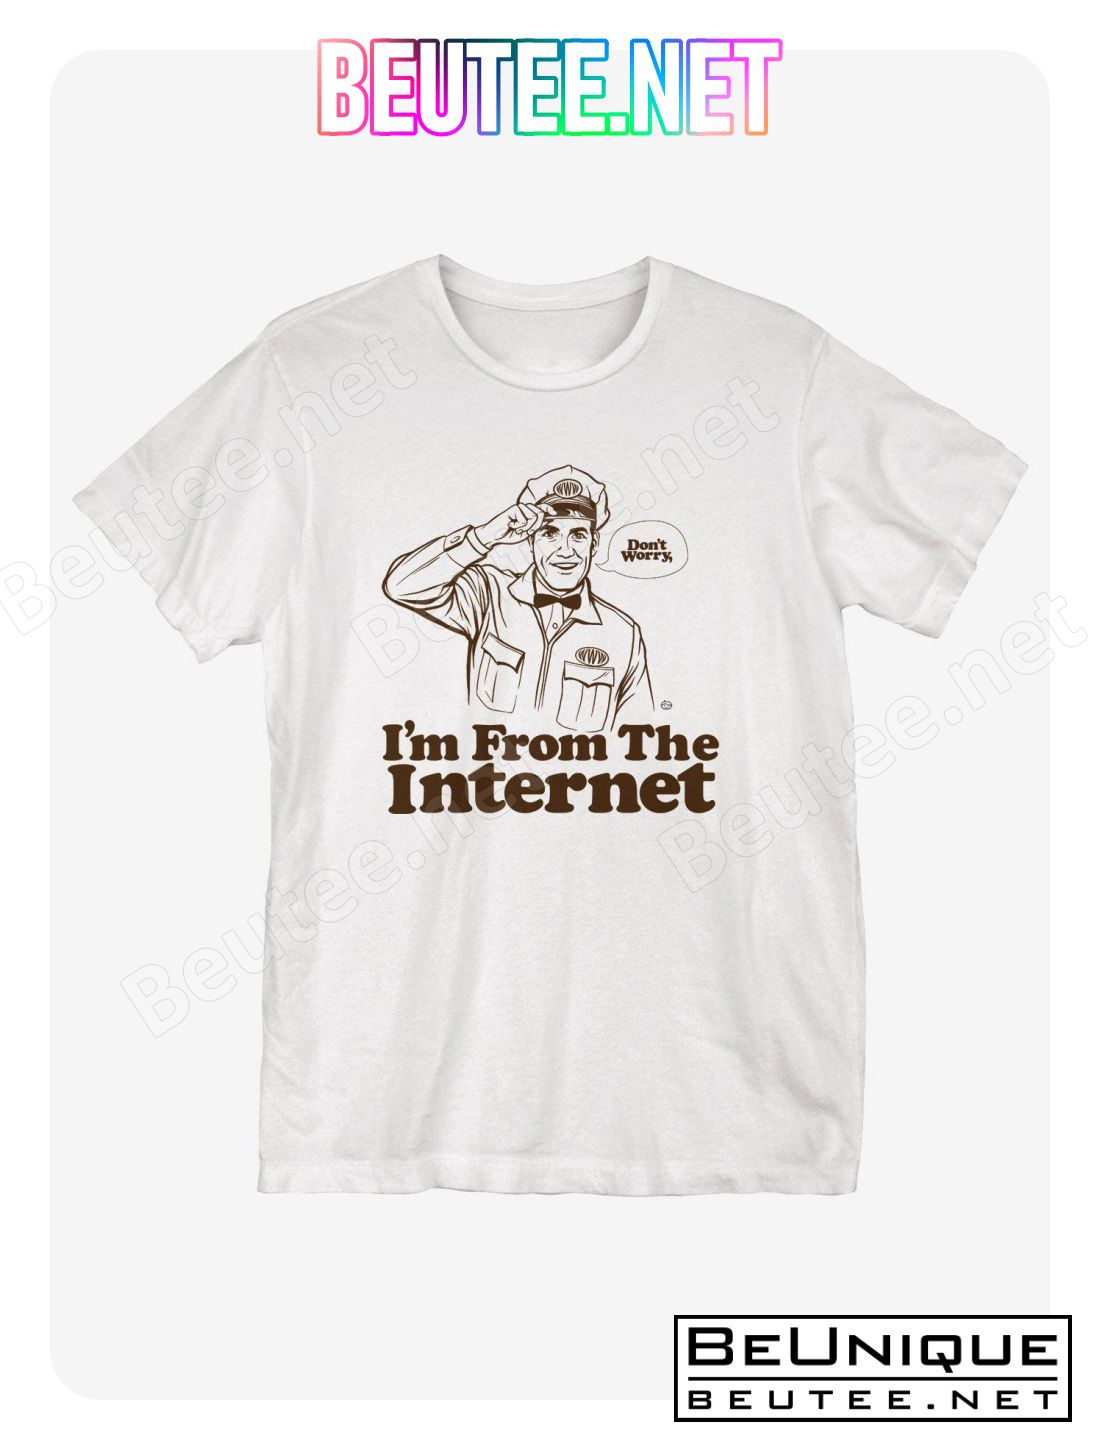 From the Internet T-Shirt